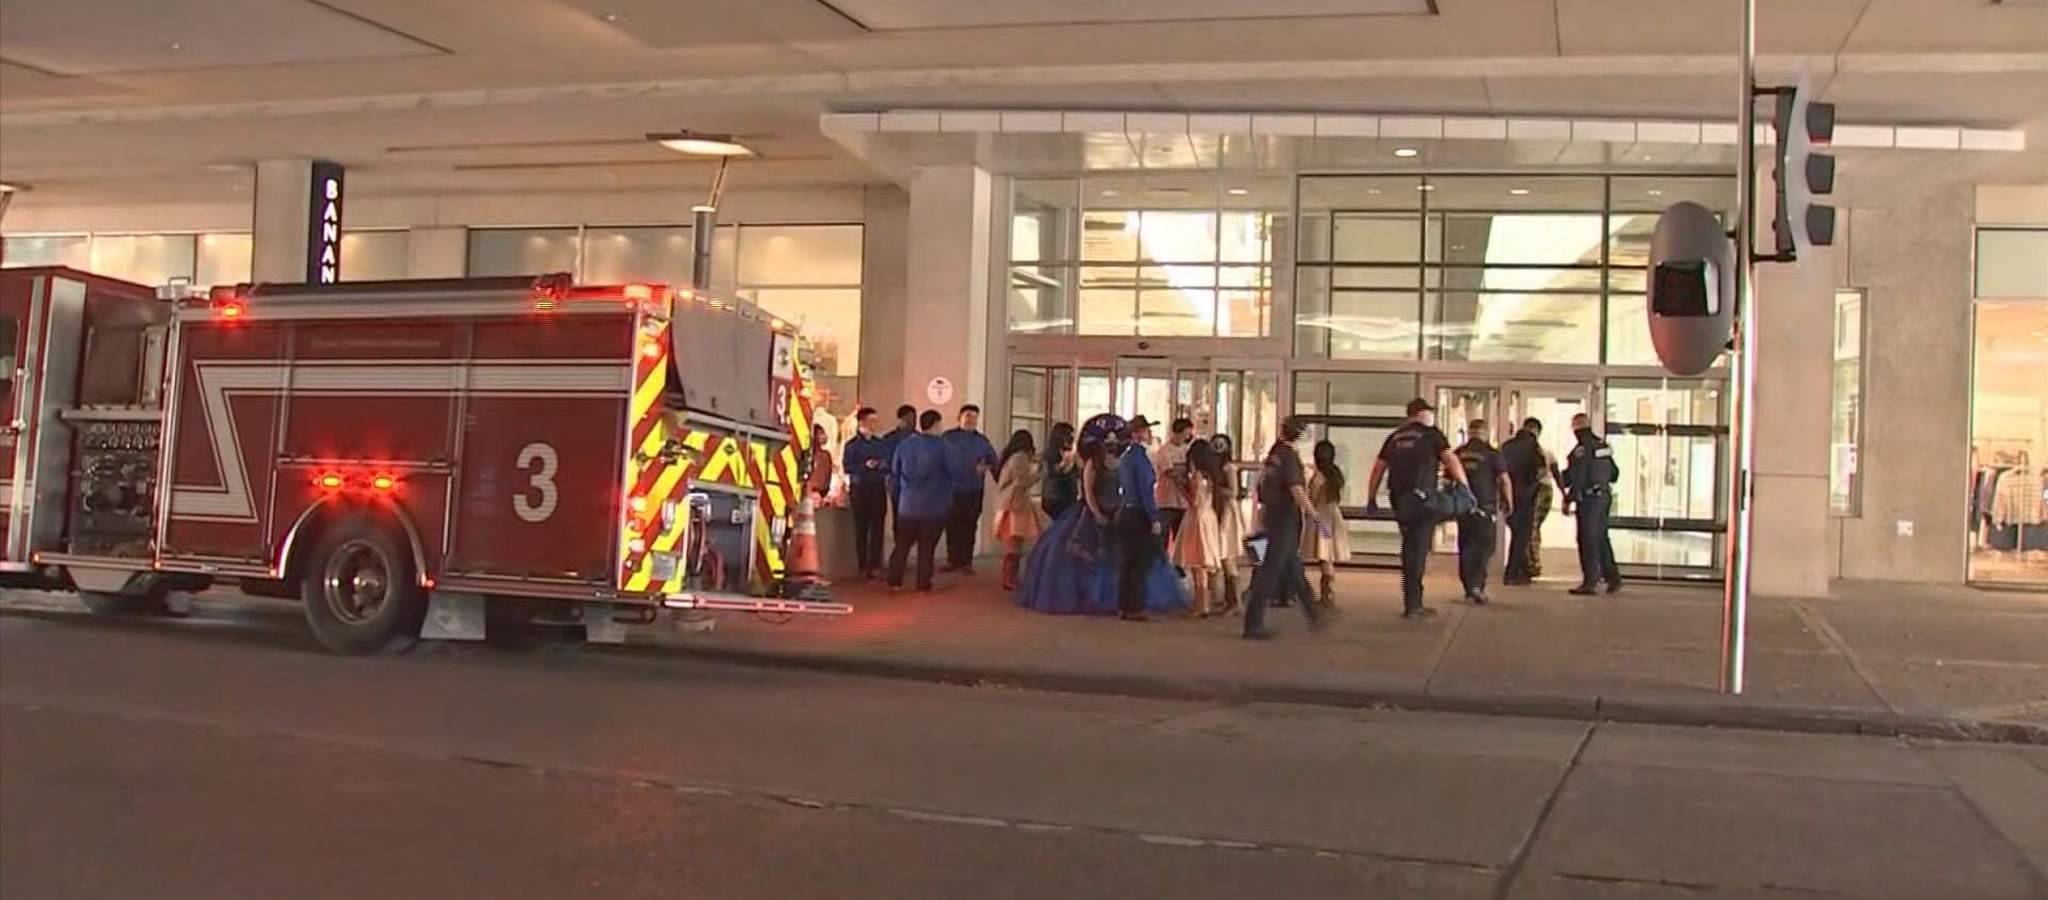 Houston police find no evidence of shooting at Galleria Mall, chief says